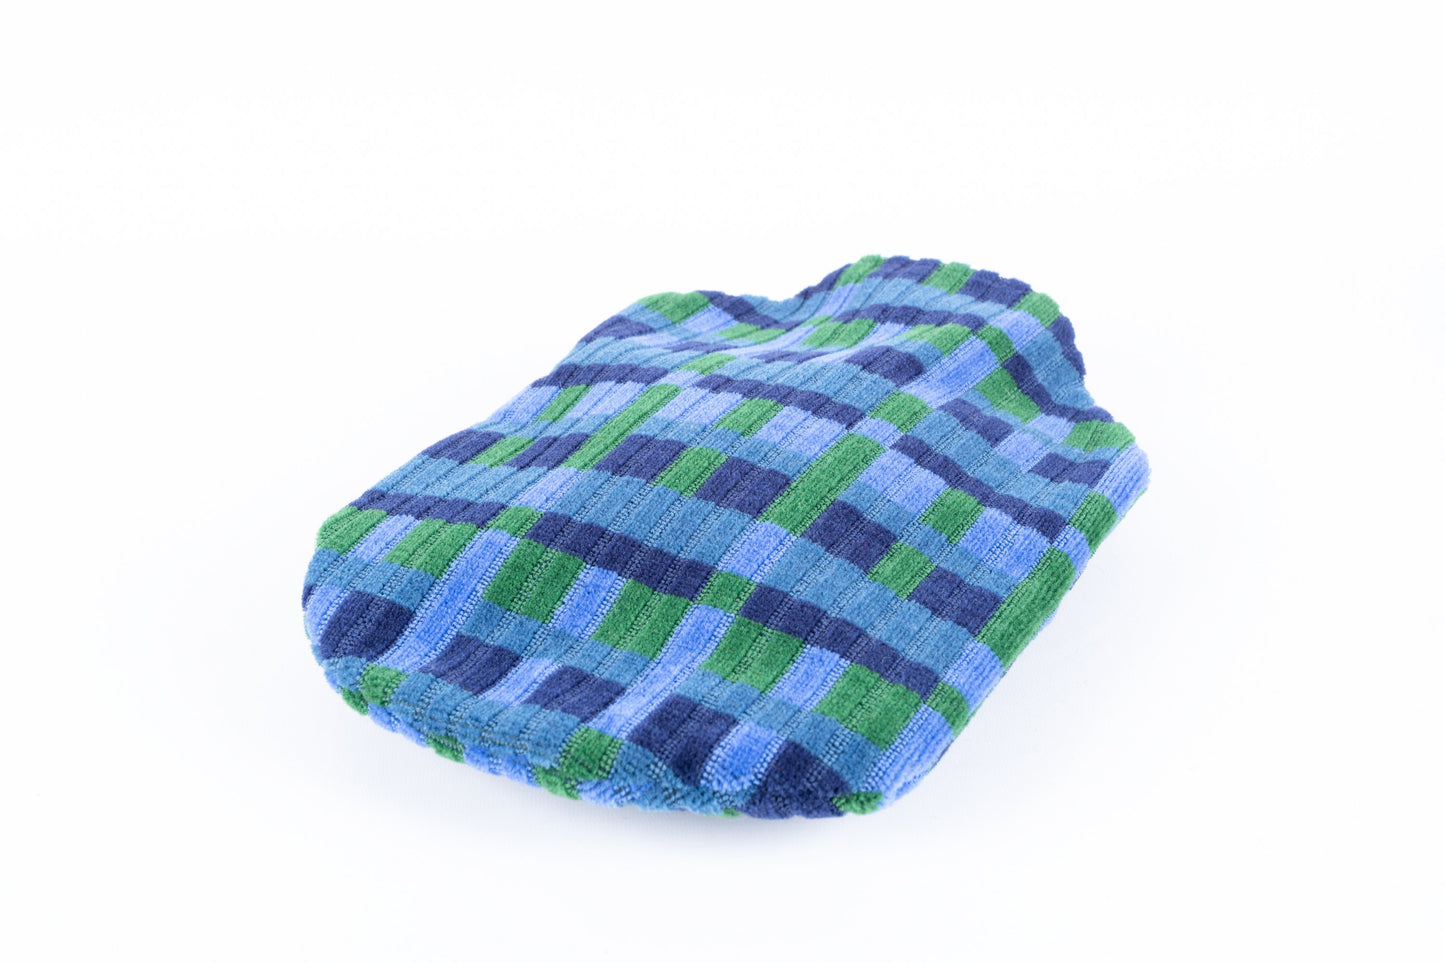 London Underground and London Bus  Victoria Line, Blue Straub Moquette Hot Water Bottle Cover